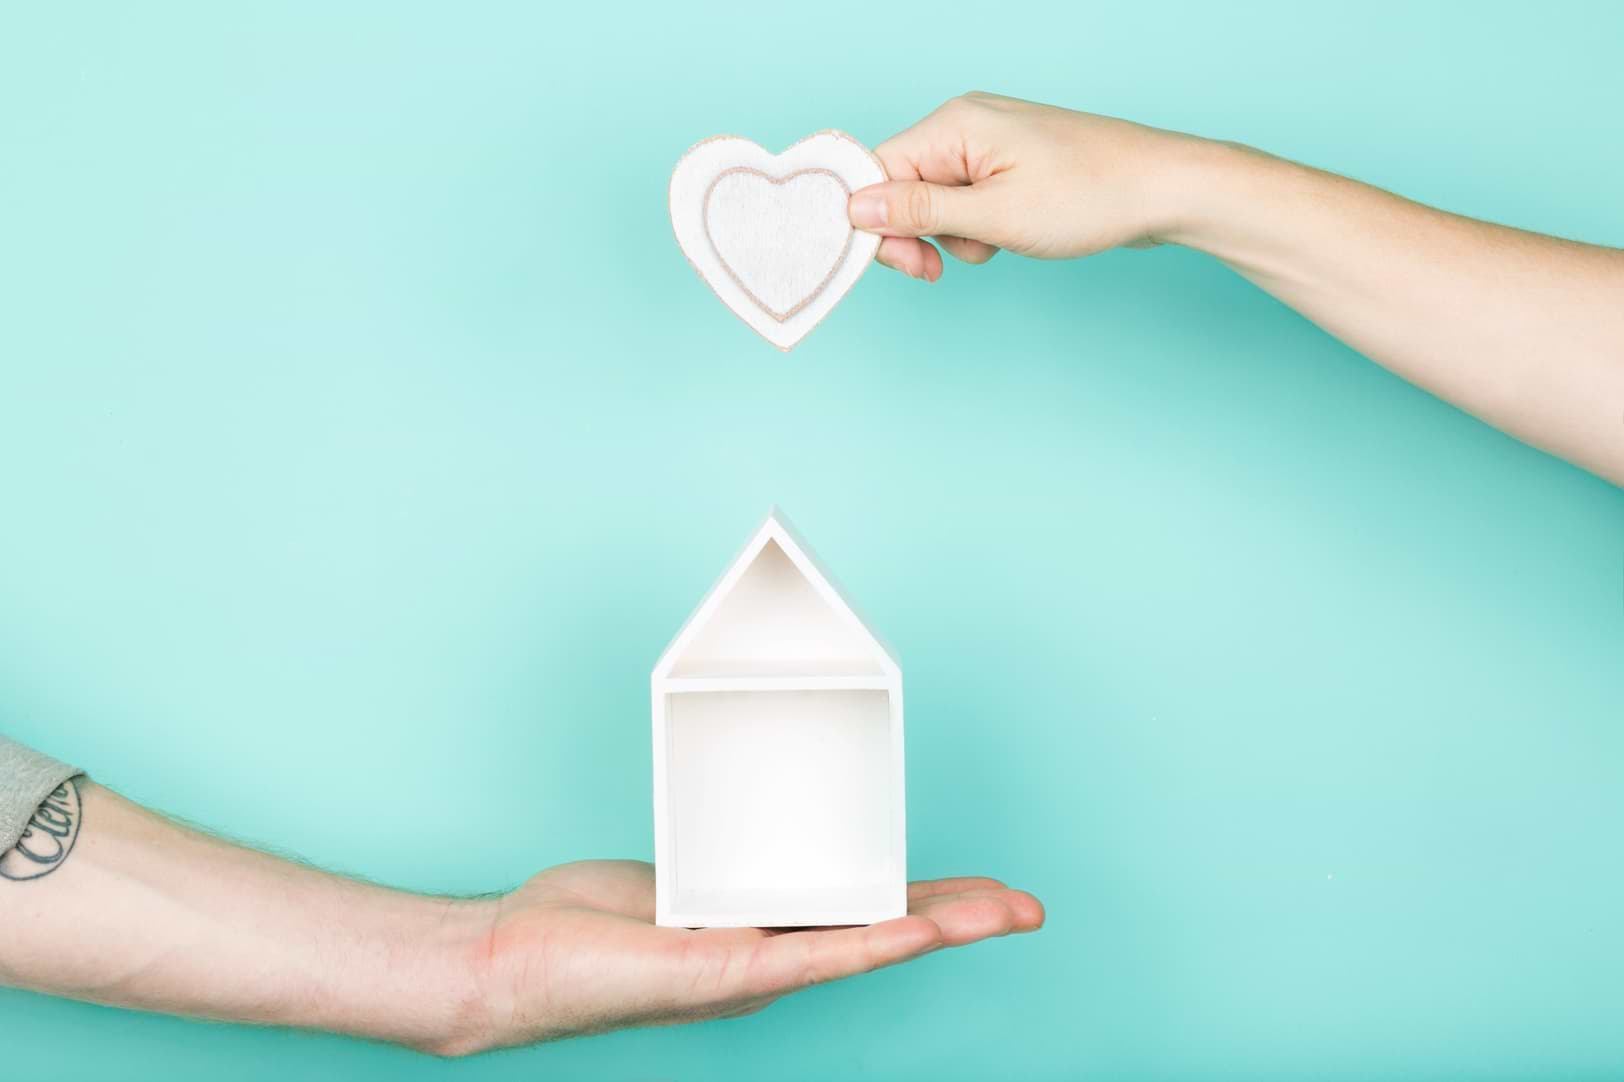 one handing holding a small house and another hand holding a heart cutout